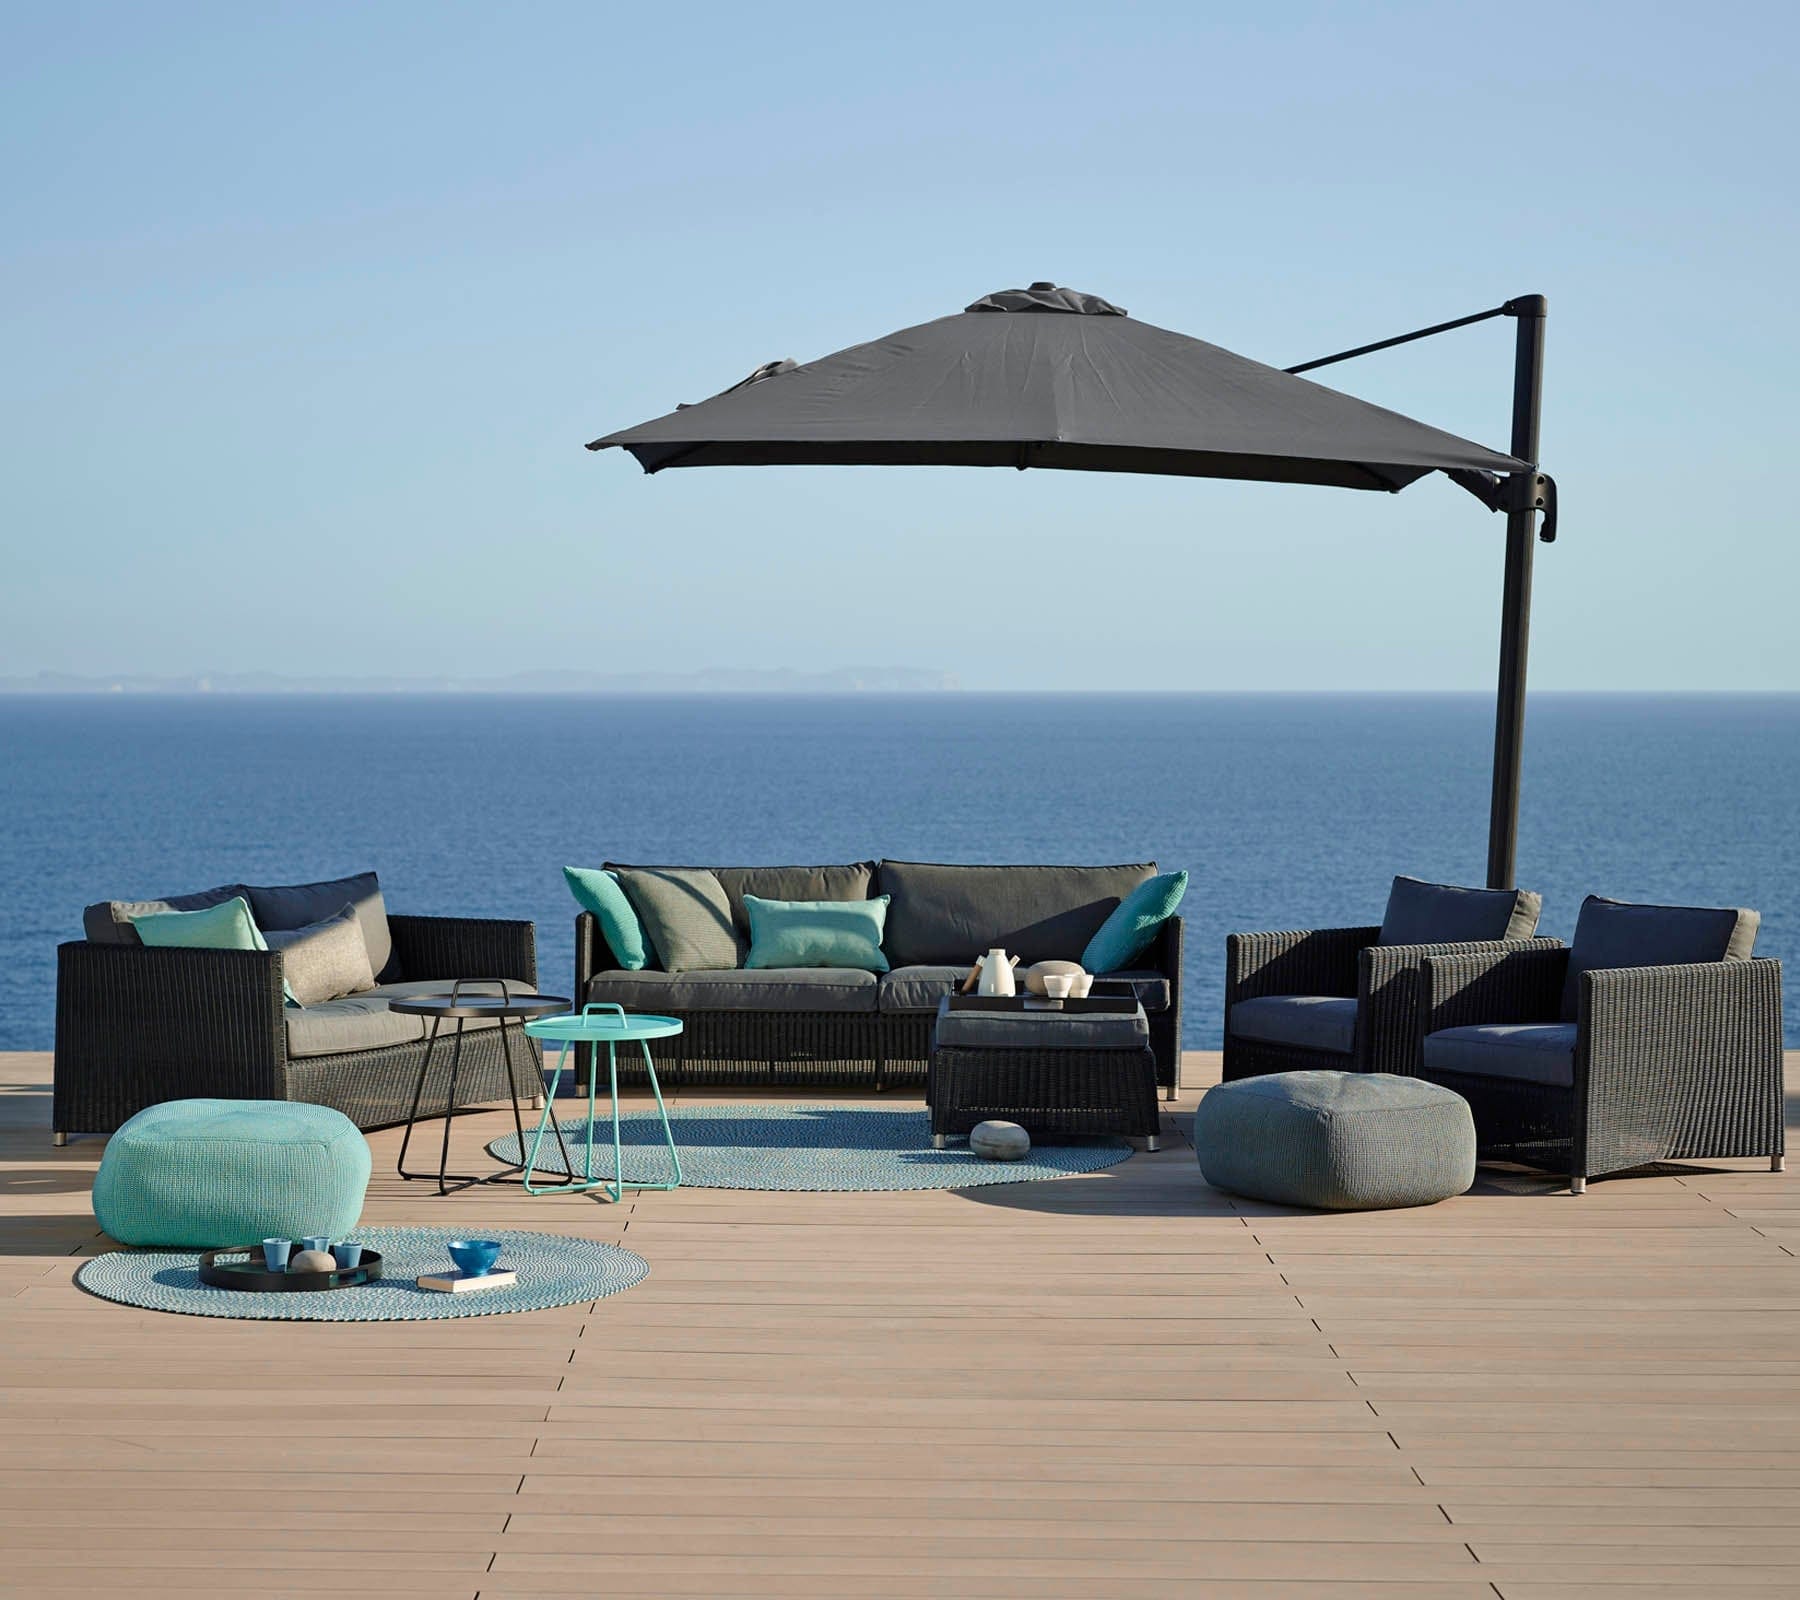 Boxhill's Diamond Weave Footstool with Cushion lifestyle image together with other Diamond Sofa collection and a parasol on wooden platform at seafront.